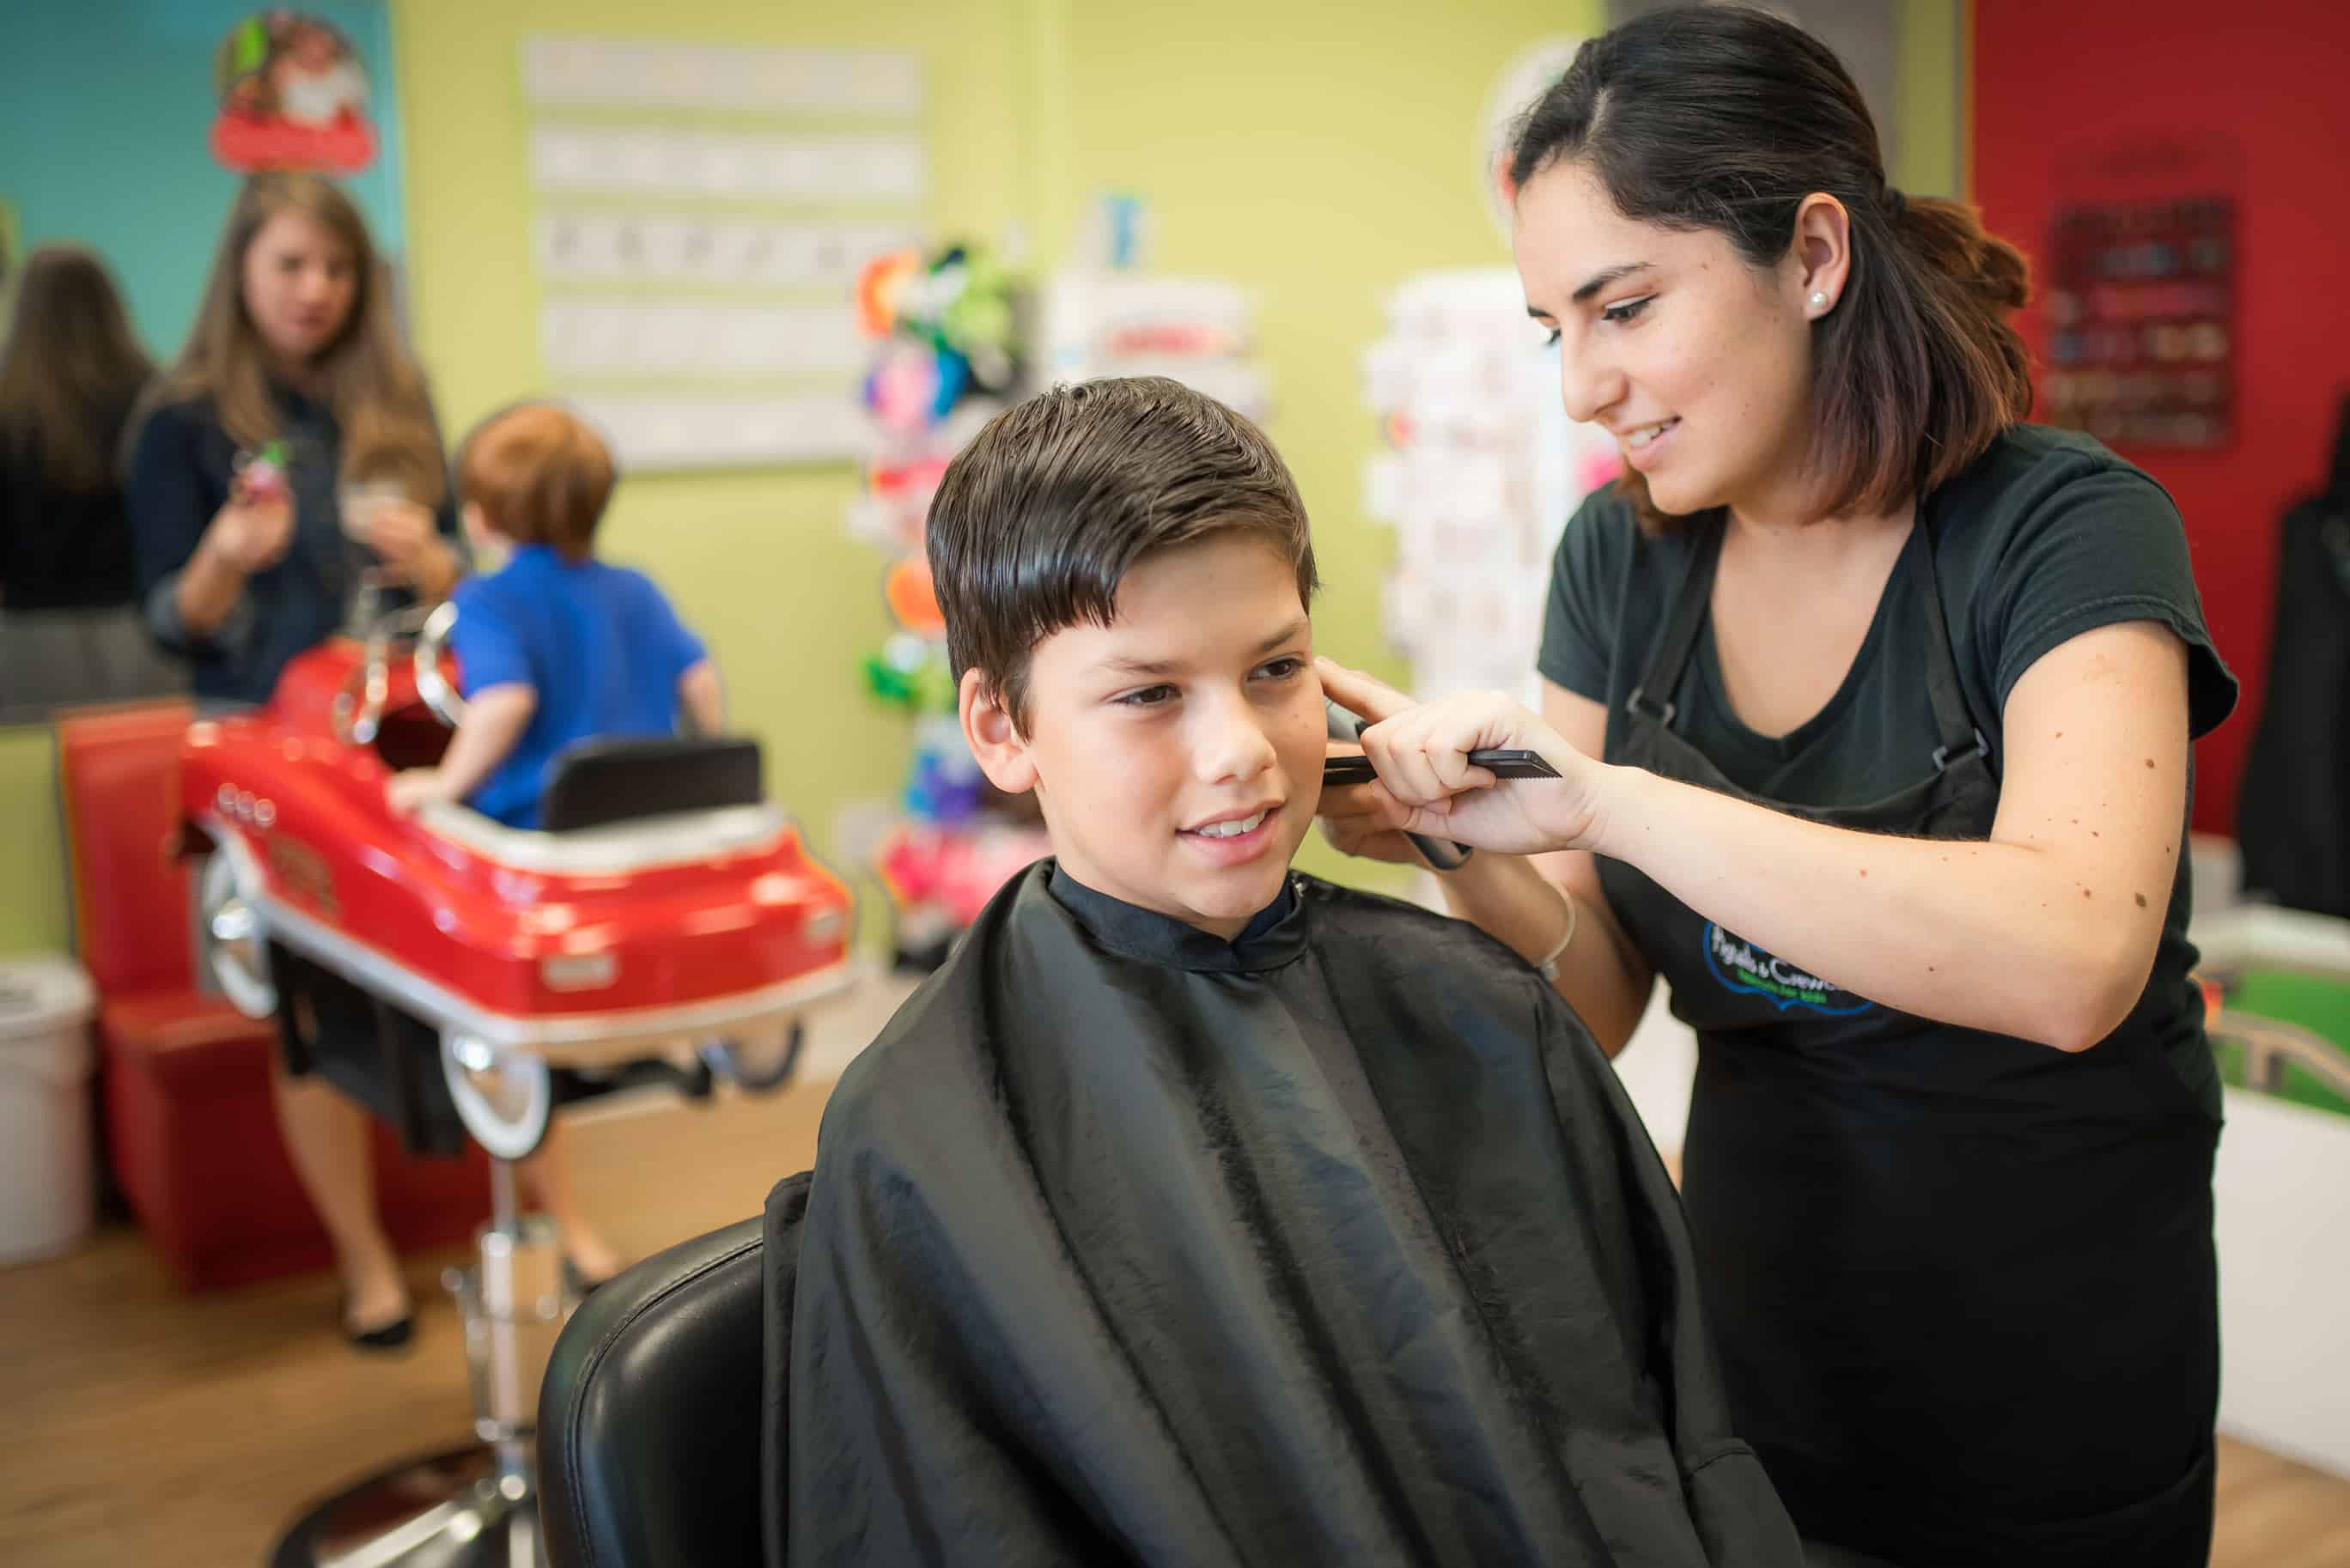 No Salon Experience Needed to Succeed as Pigtails & Crewcuts Owner